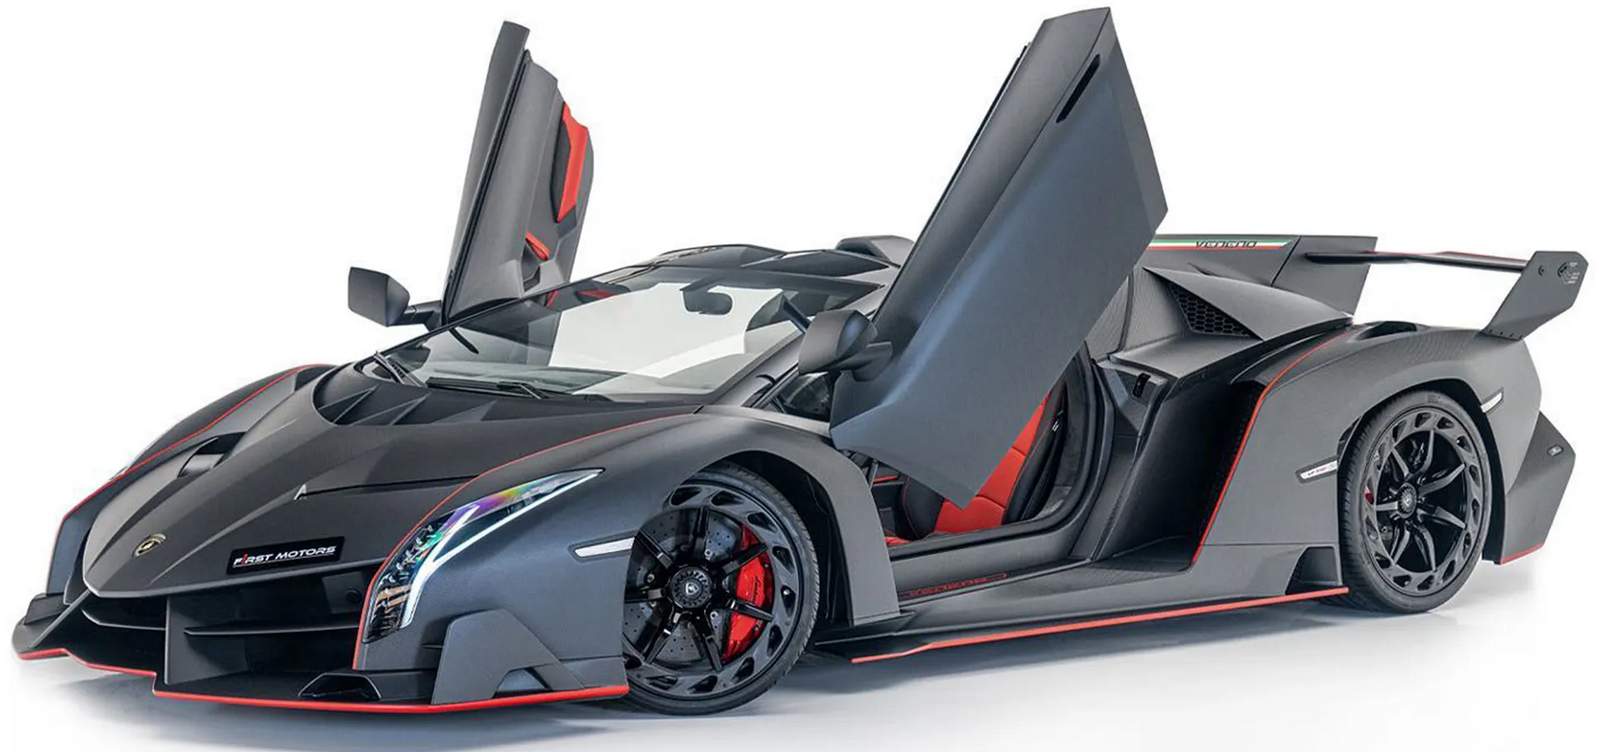 The worlds first and only Lamborghini Veneno Roadster with an exposed  carbon fiber body is up for grabs and can fetch more than $6 million -  Luxurylaunches